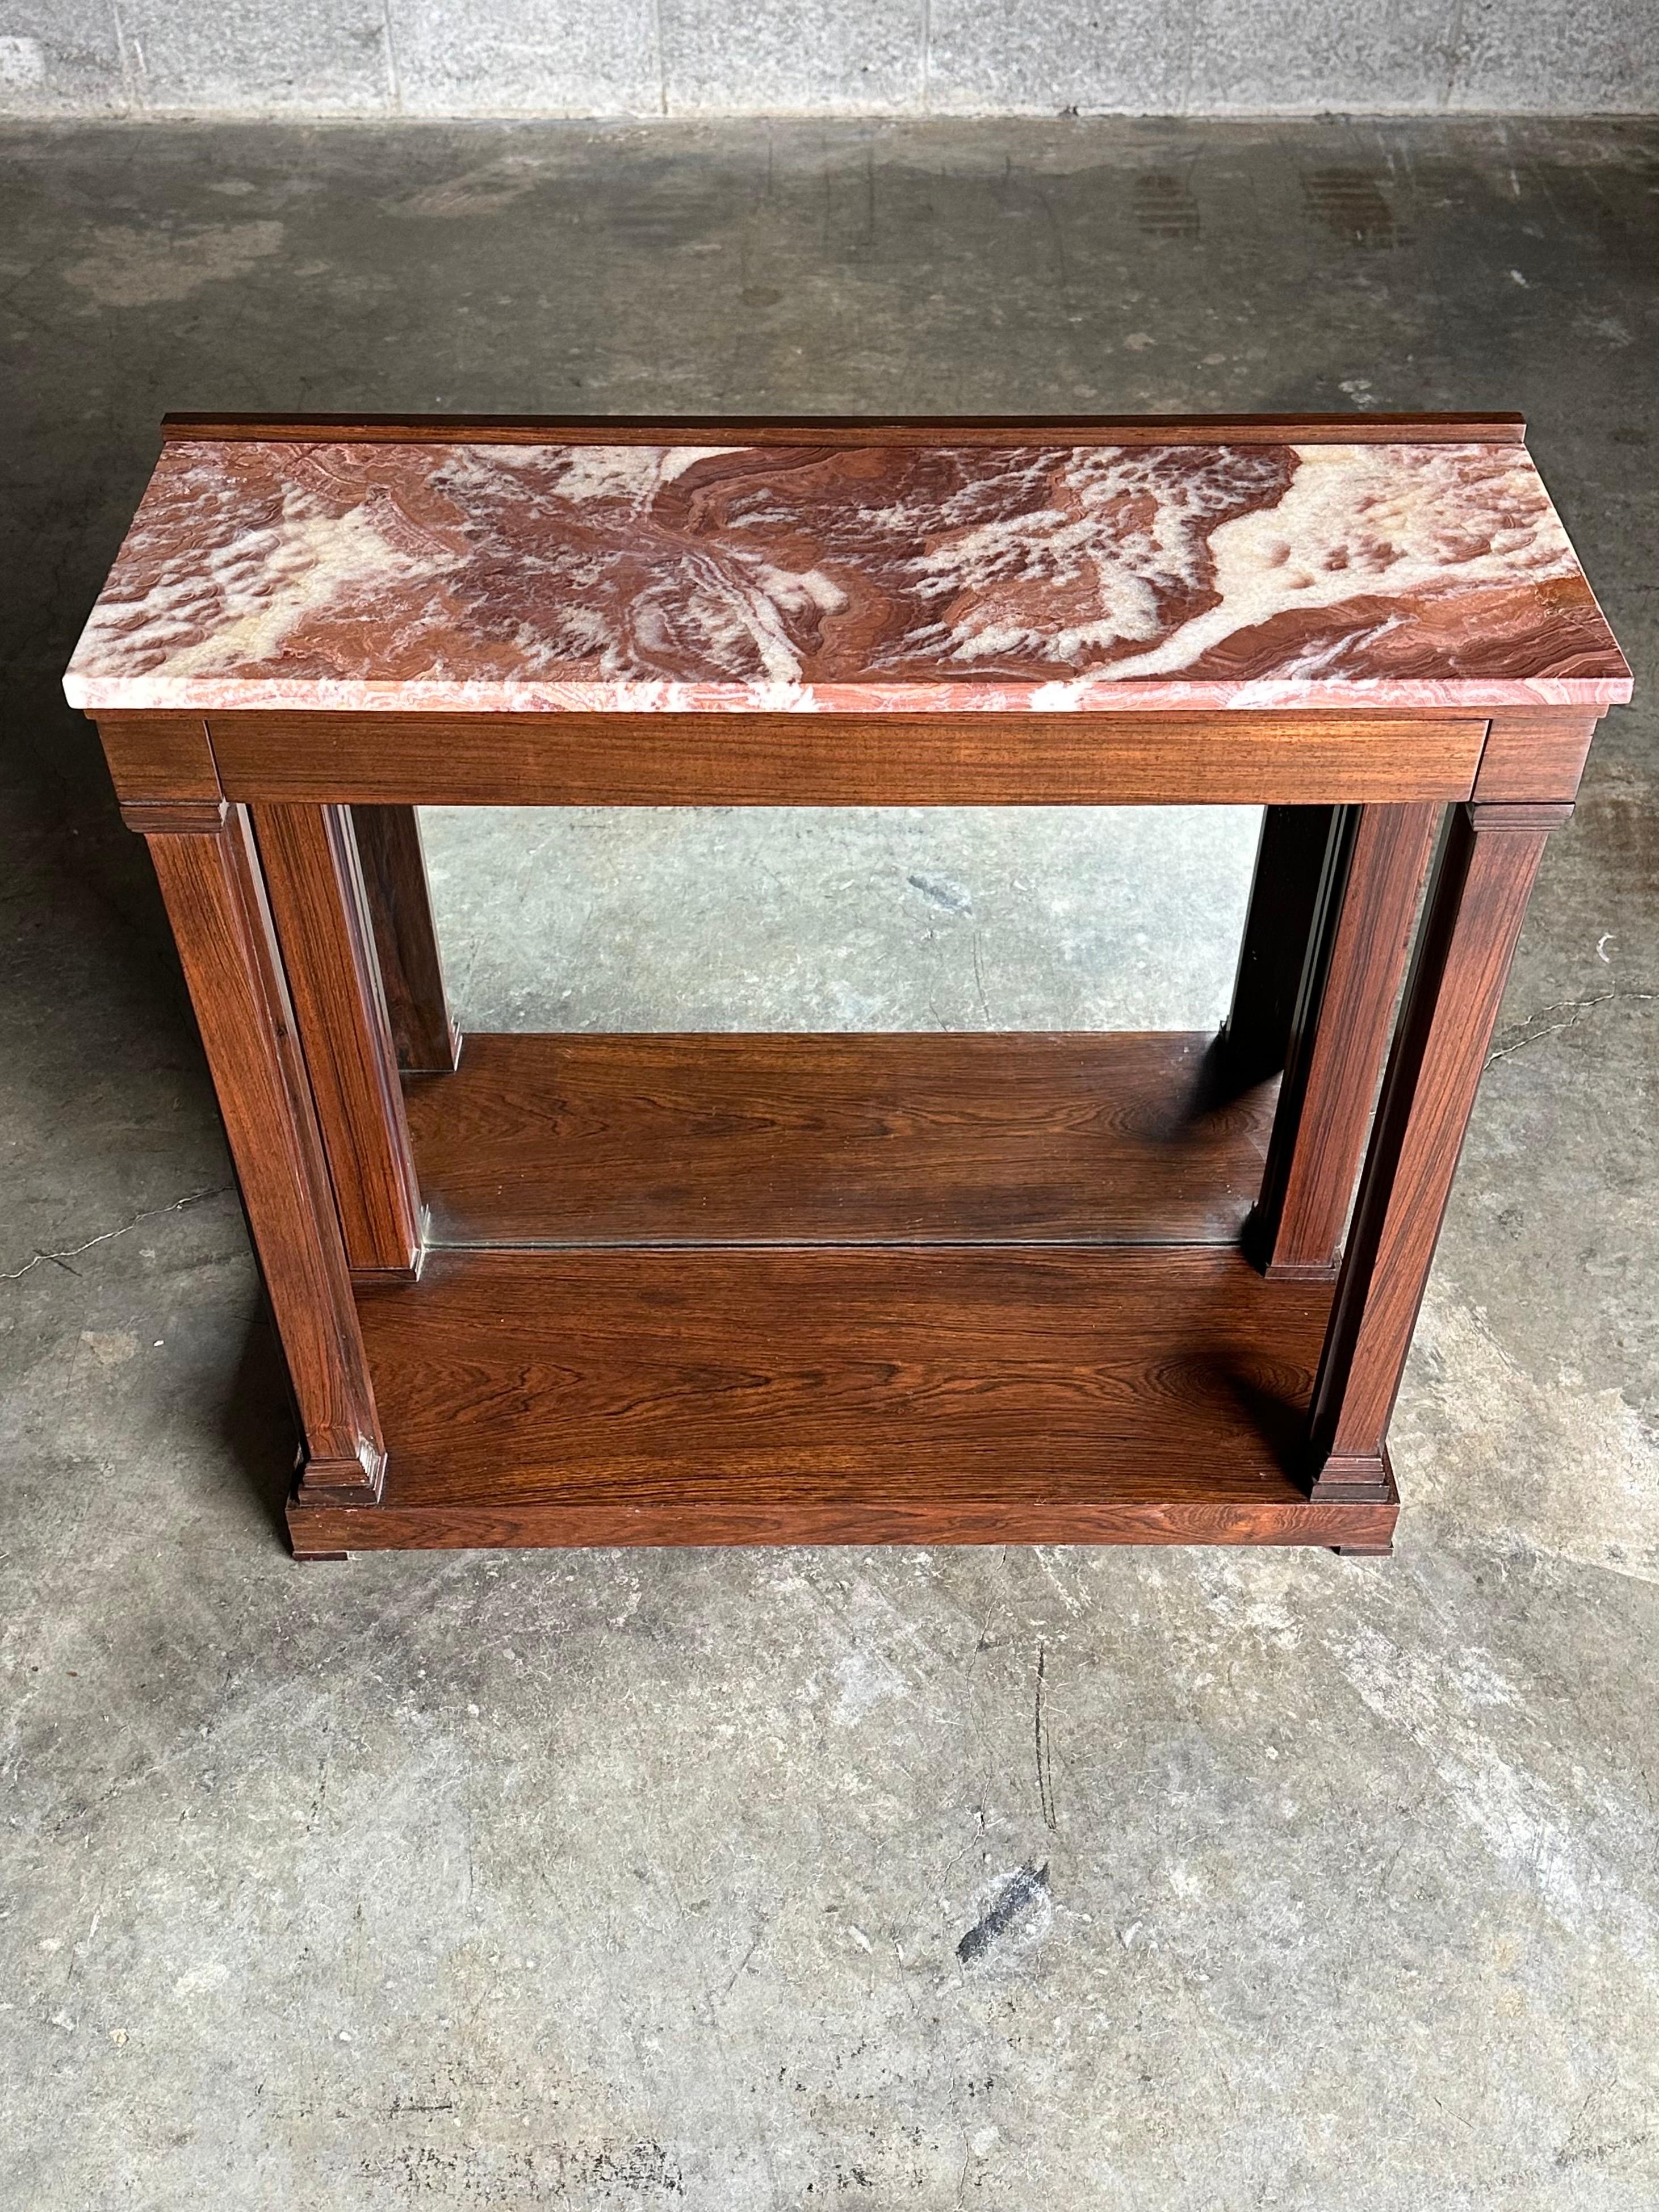 A rare console table designed by Edward Wormley for Dunbar Furniture. The table features traditional design elements that are so often seen in many of his pieces along with Dunbar’s top tier build quality. Piece features a mirrored back, squared off